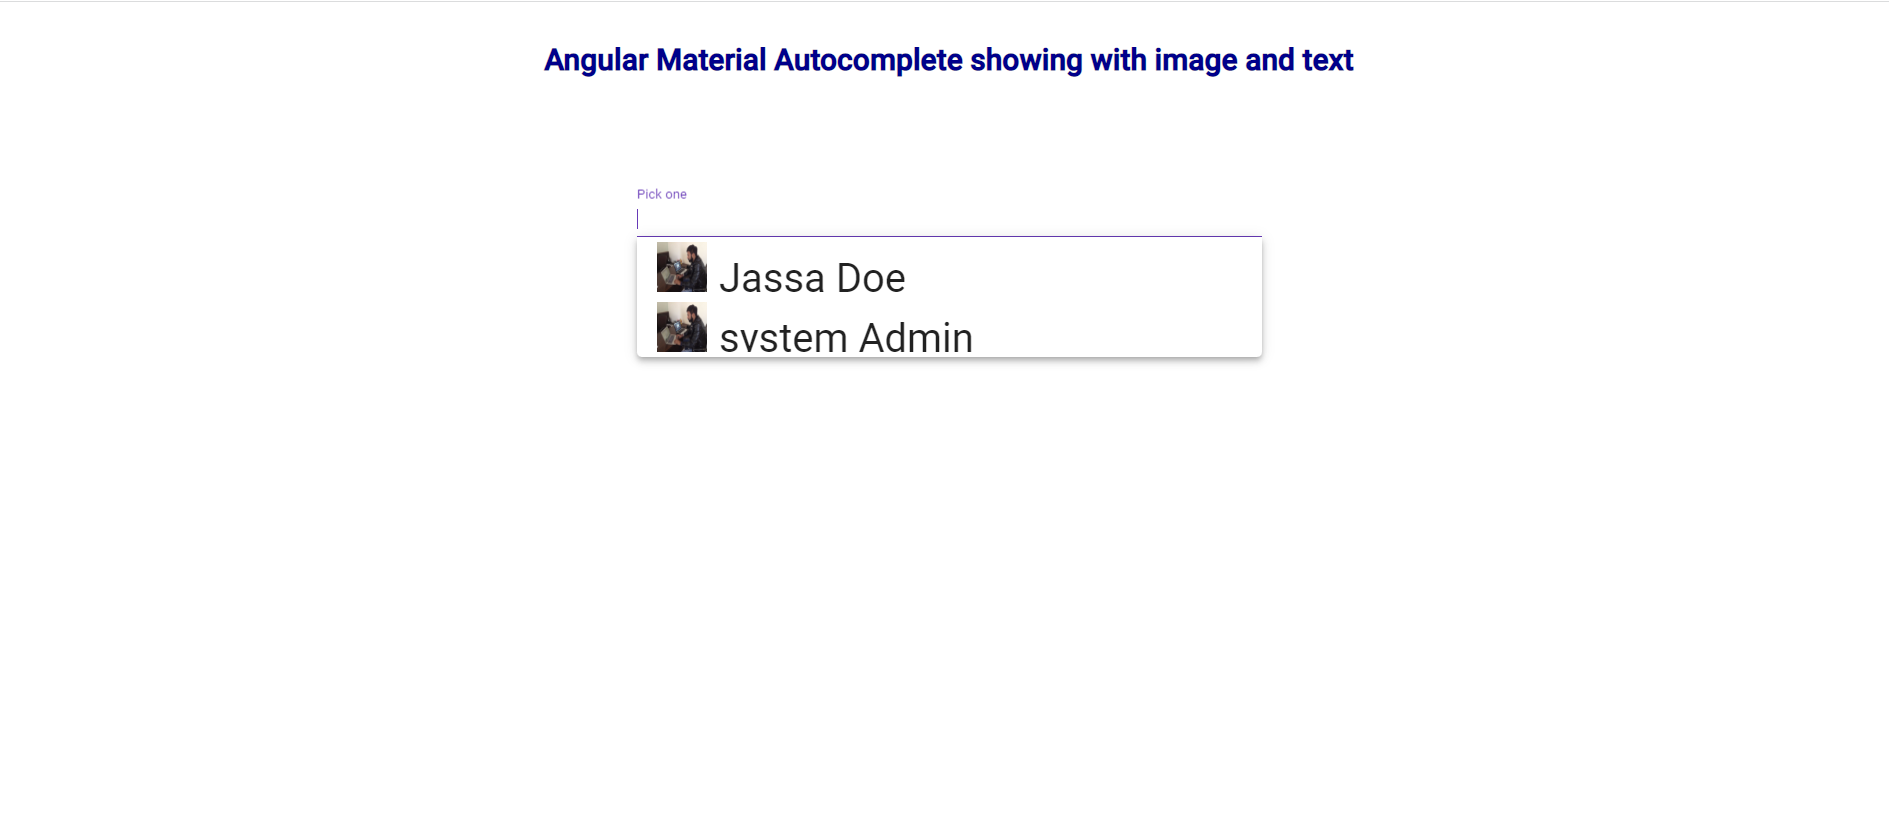 Angular Material Autocomplete showing with image and text